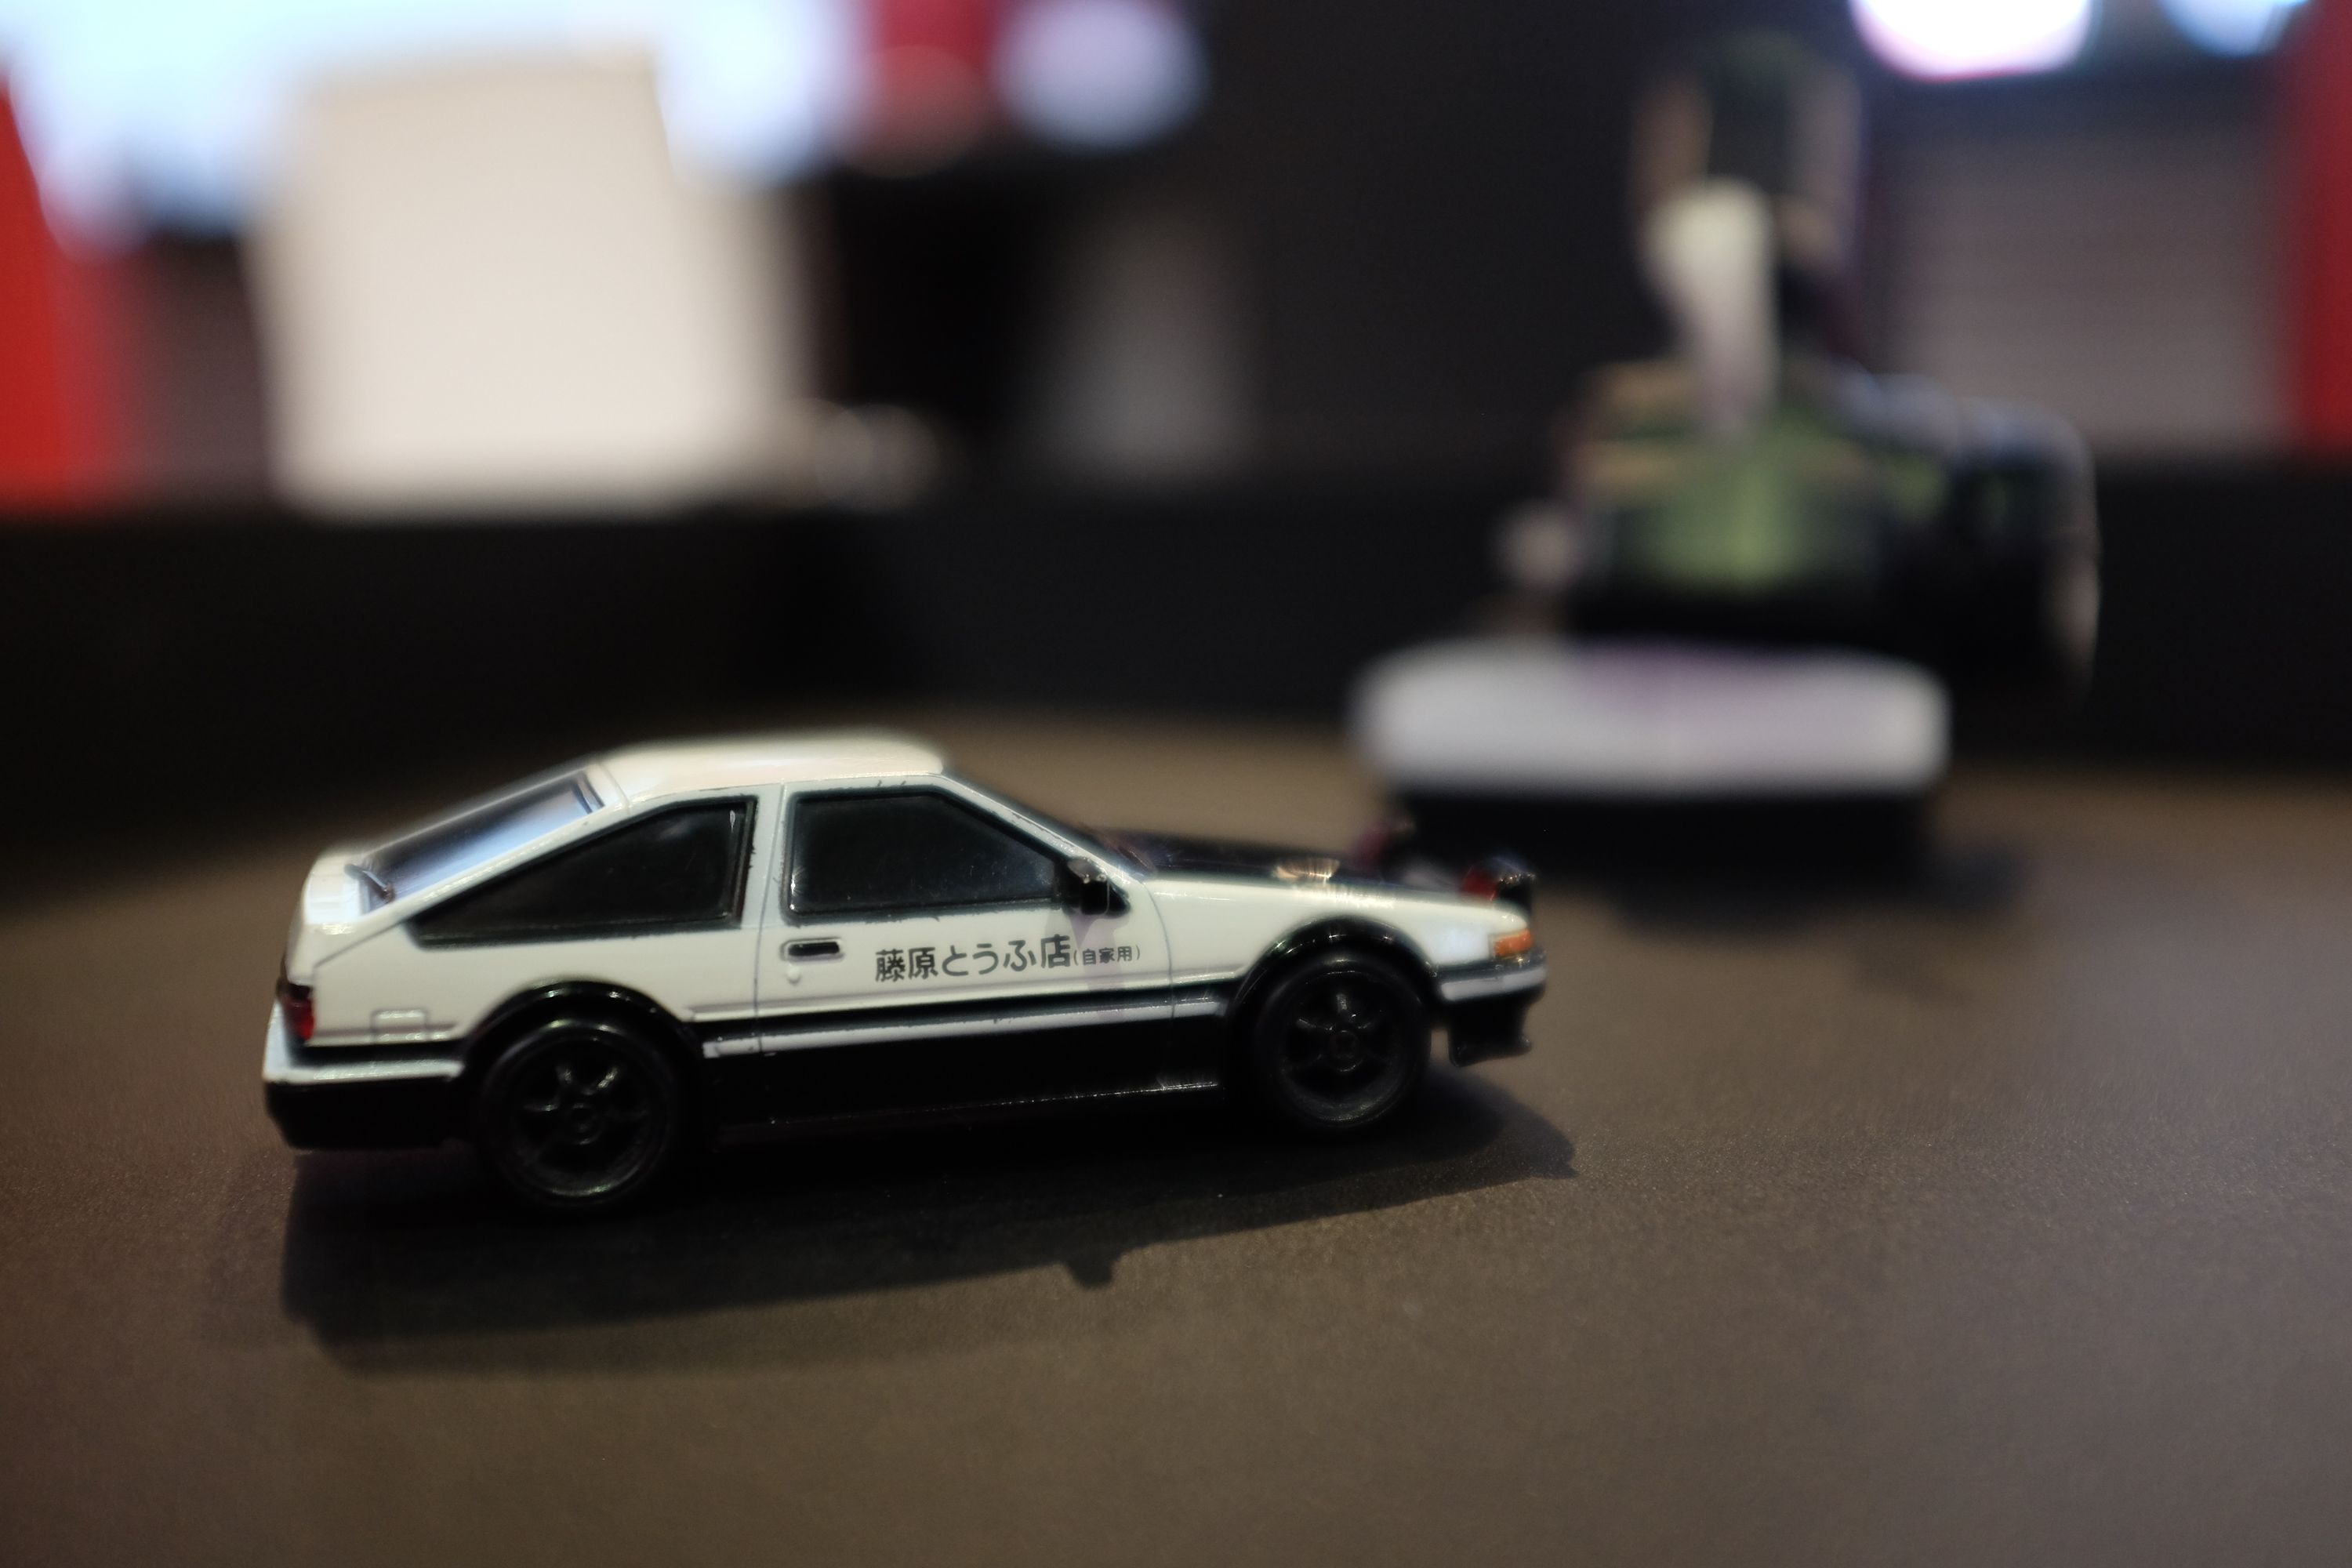 The model of a white Toyota AE86 on a table.